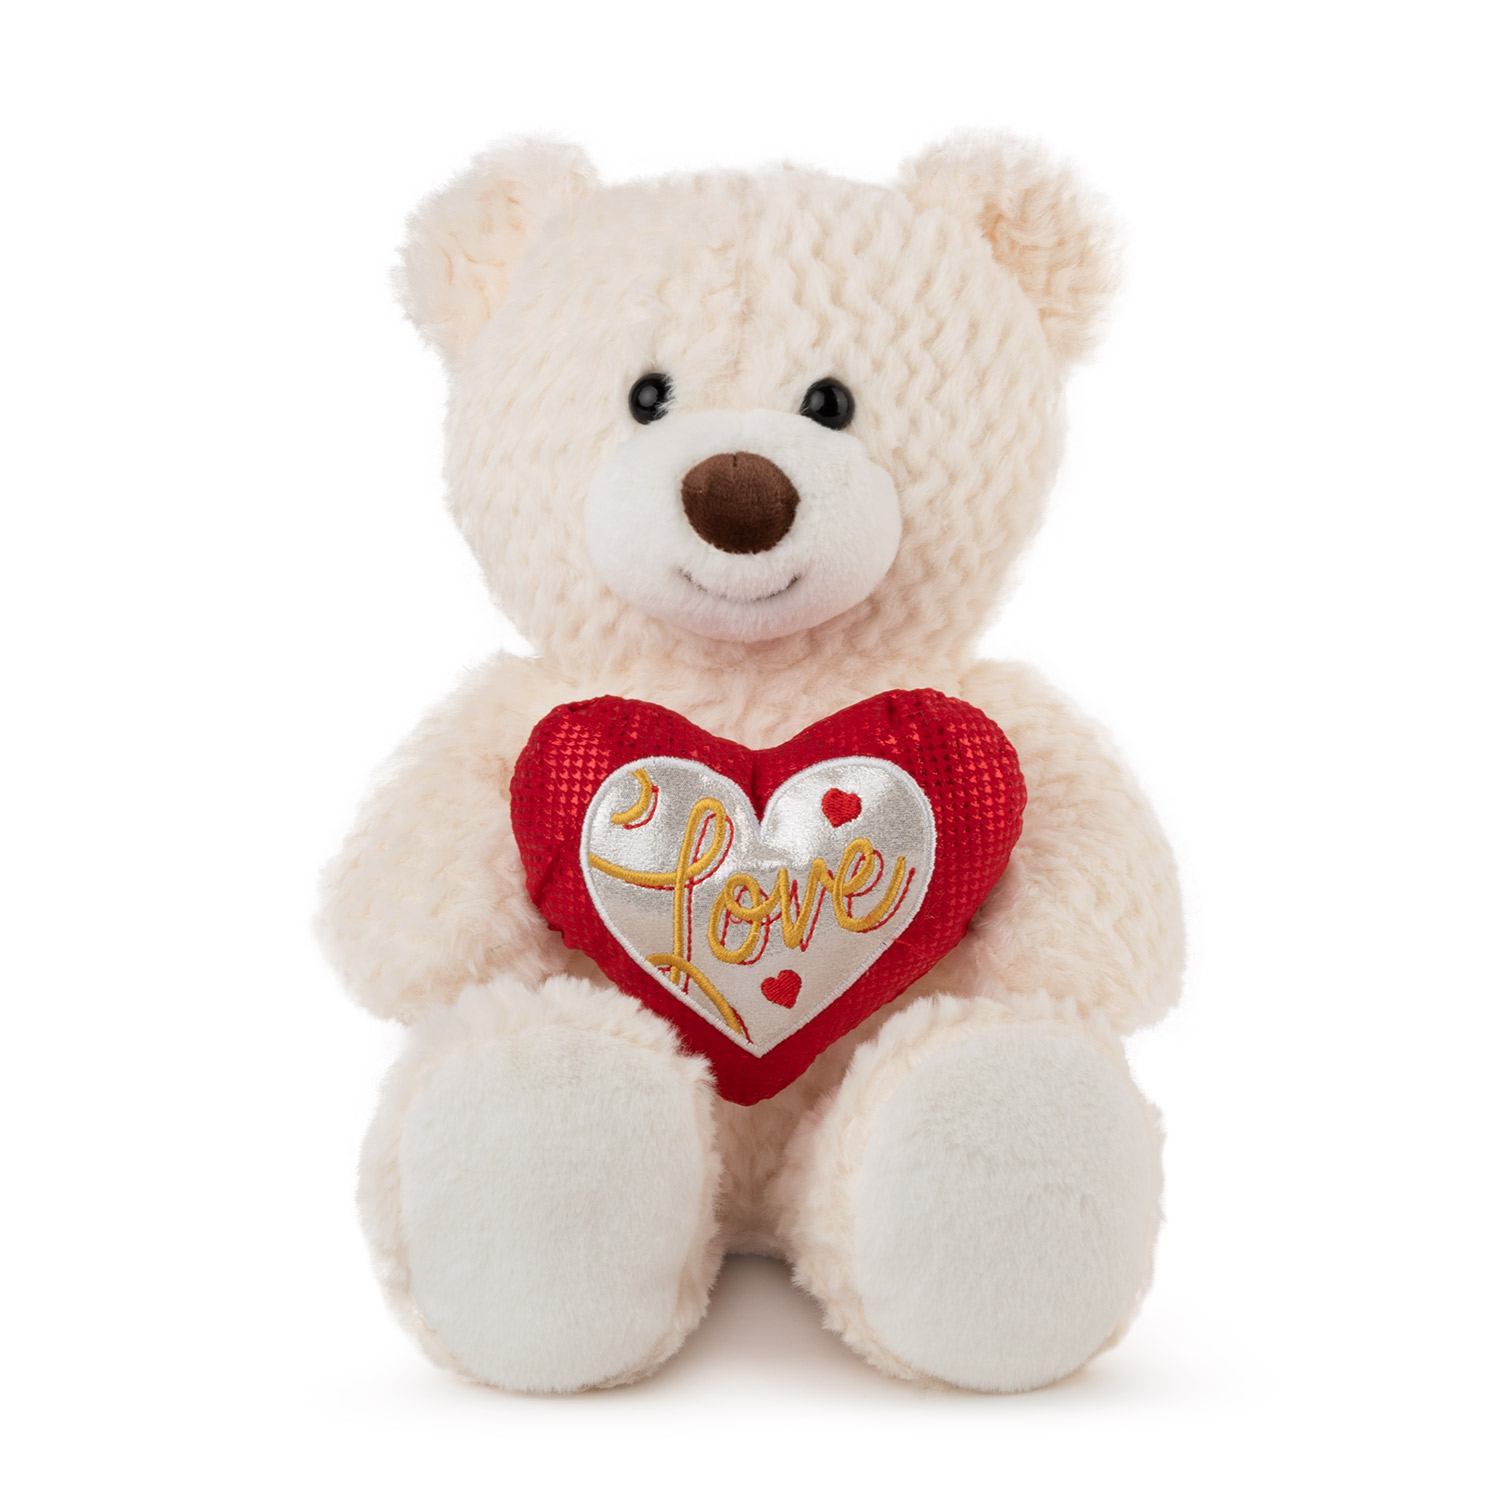 Bear with heart - White